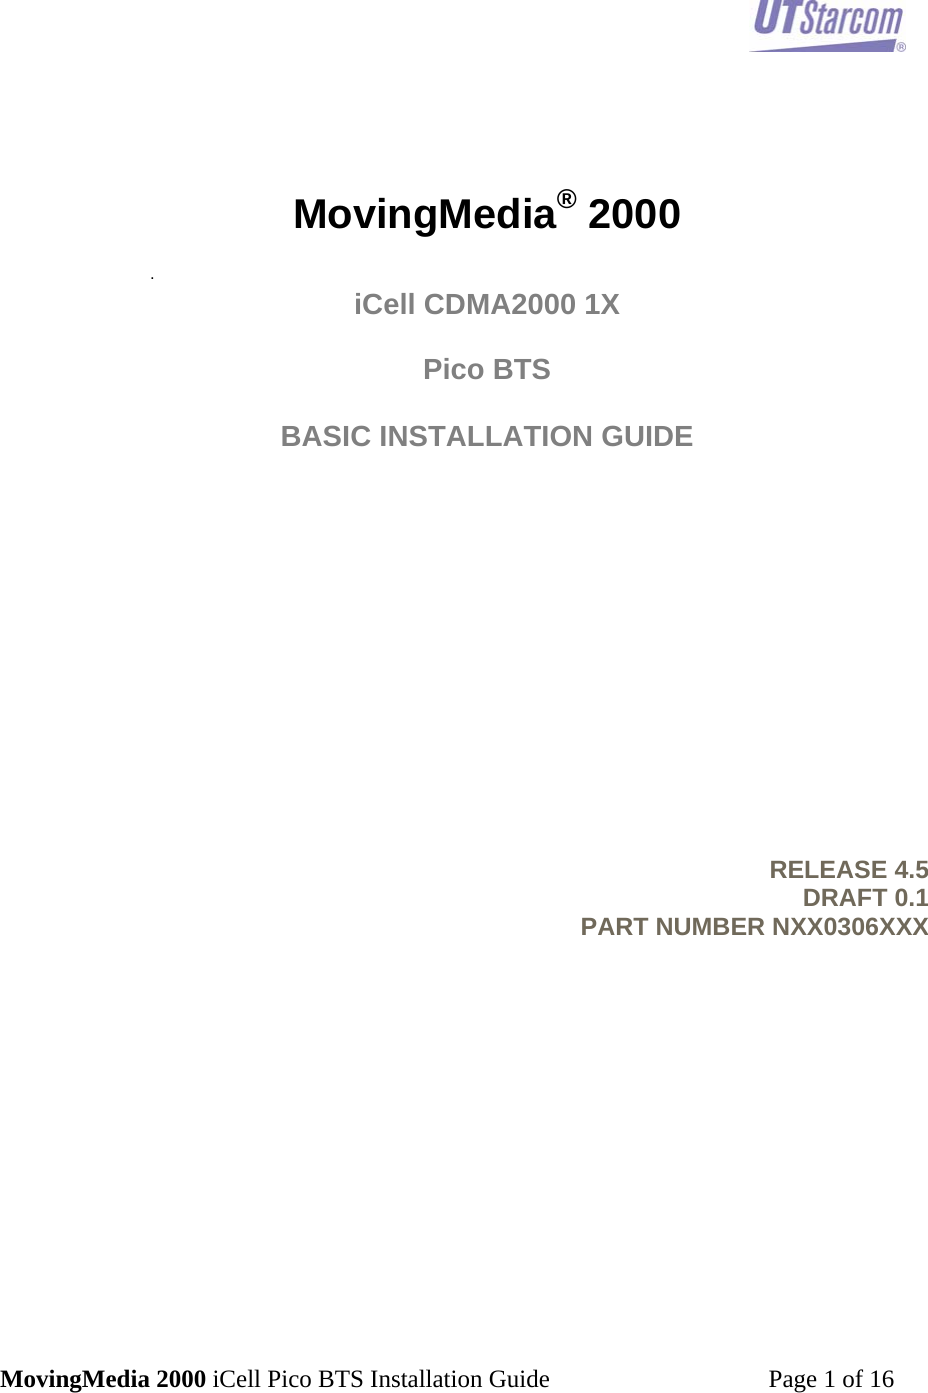 MovingMedia 2000 iCell Pico BTS Installation Guide         Page 1 of 16           MovingMedia® 2000  .  iCell CDMA2000 1X  Pico BTS  BASIC INSTALLATION GUIDE               RELEASE 4.5 DRAFT 0.1 PART NUMBER NXX0306XXX            